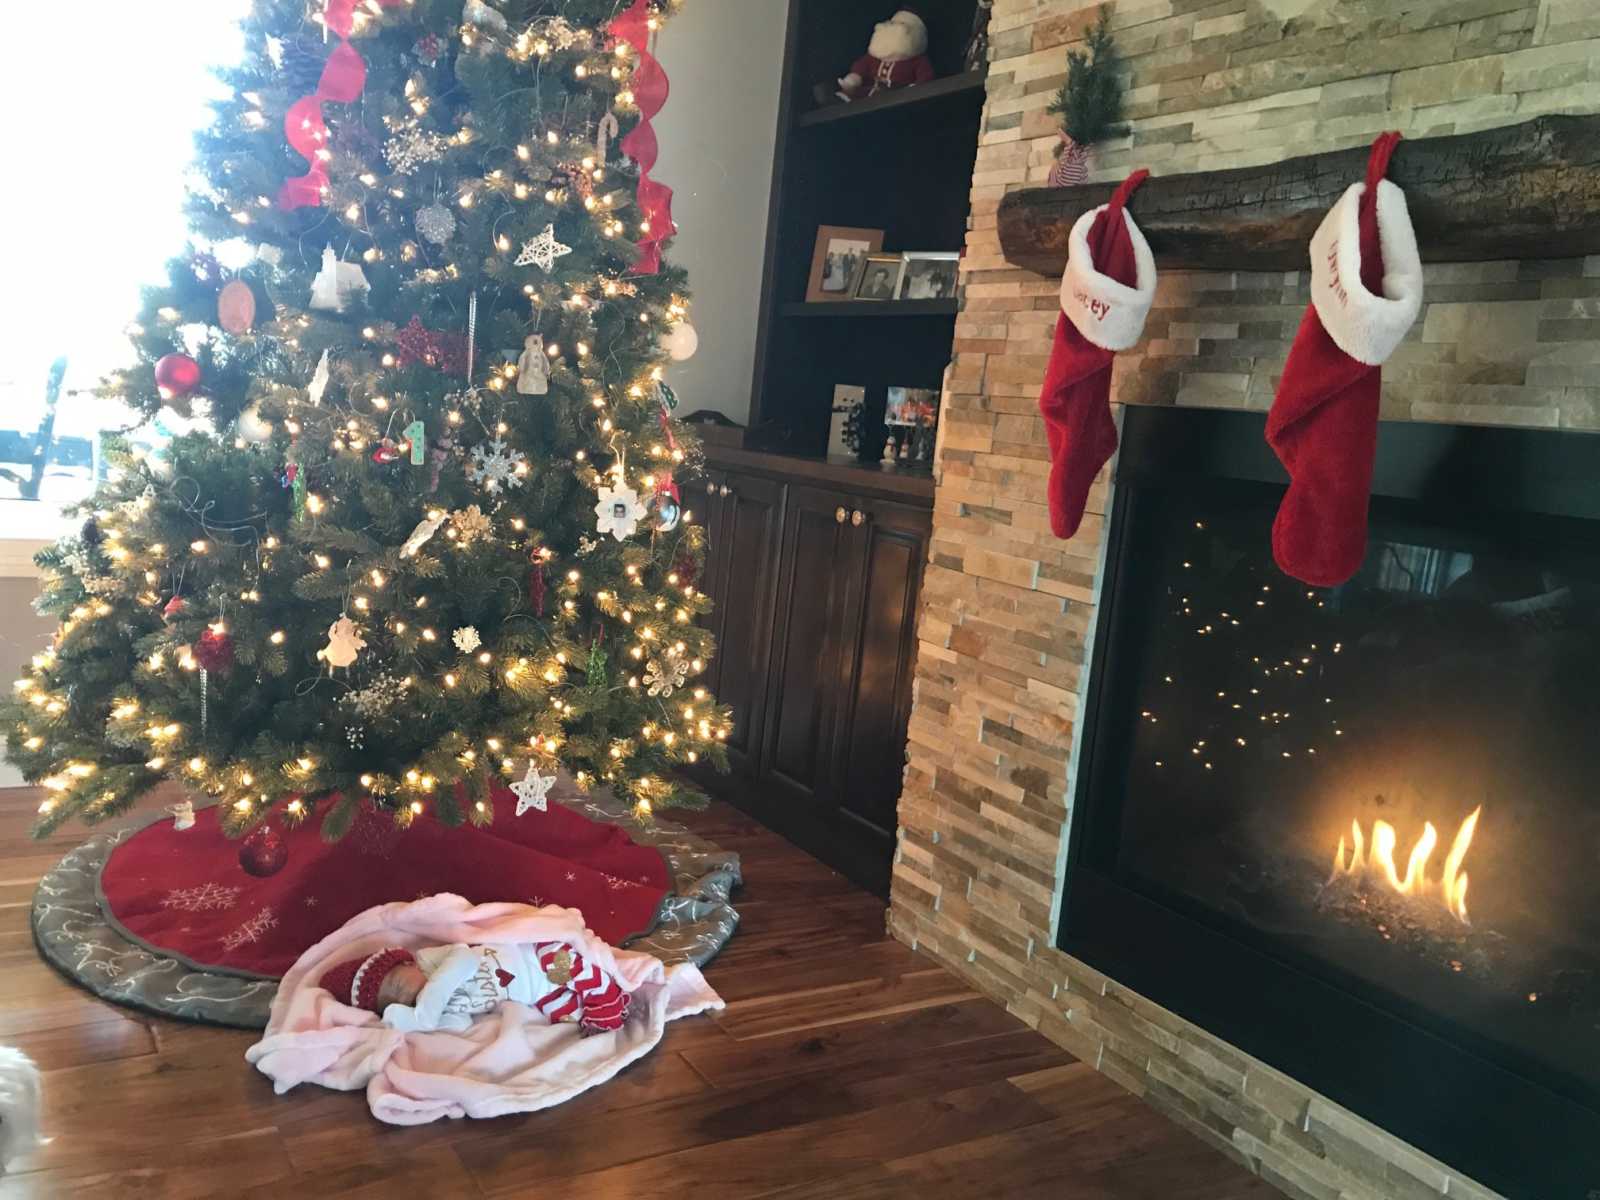 adopted newborn baby is wrapped in blankets under Christmas tree next to a burning fireplace and stockings